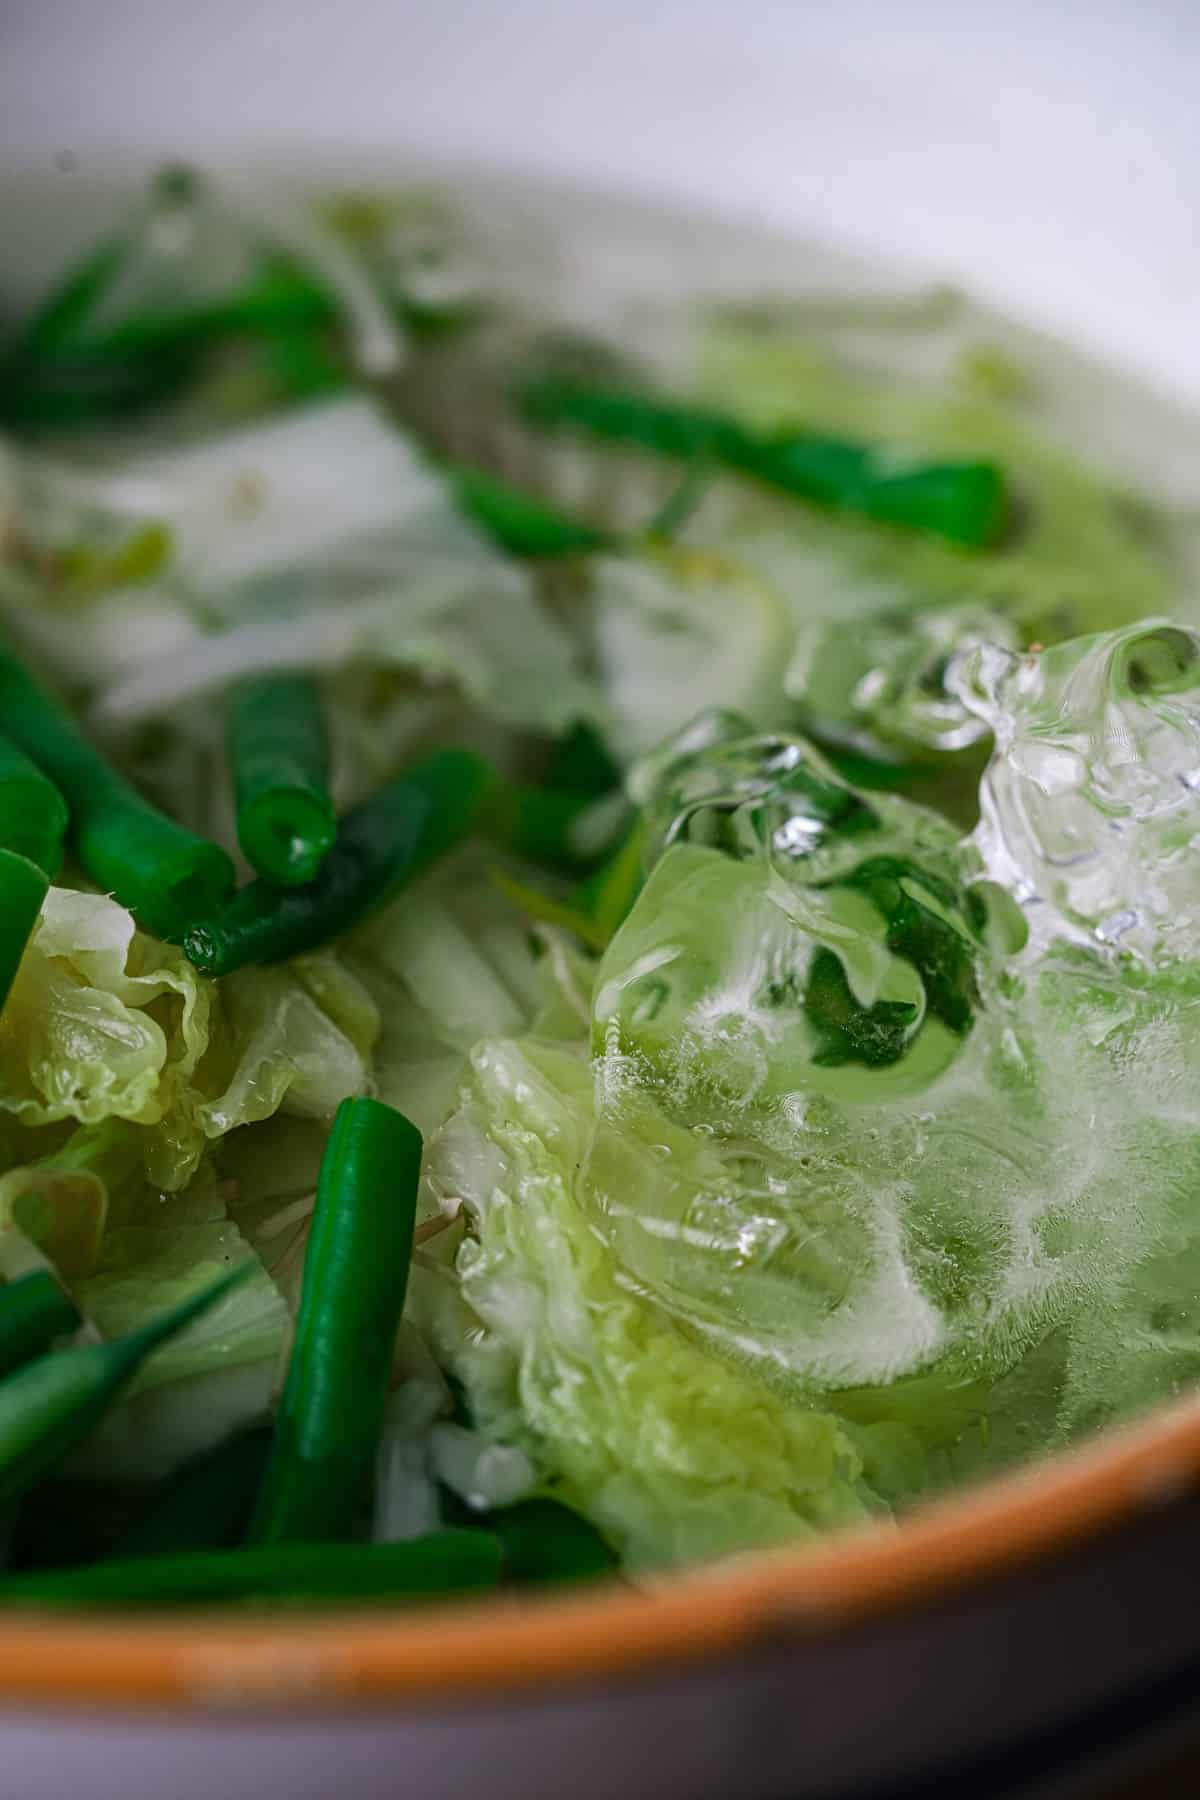 A bowl of blanched vegetables being shocked in ice water.